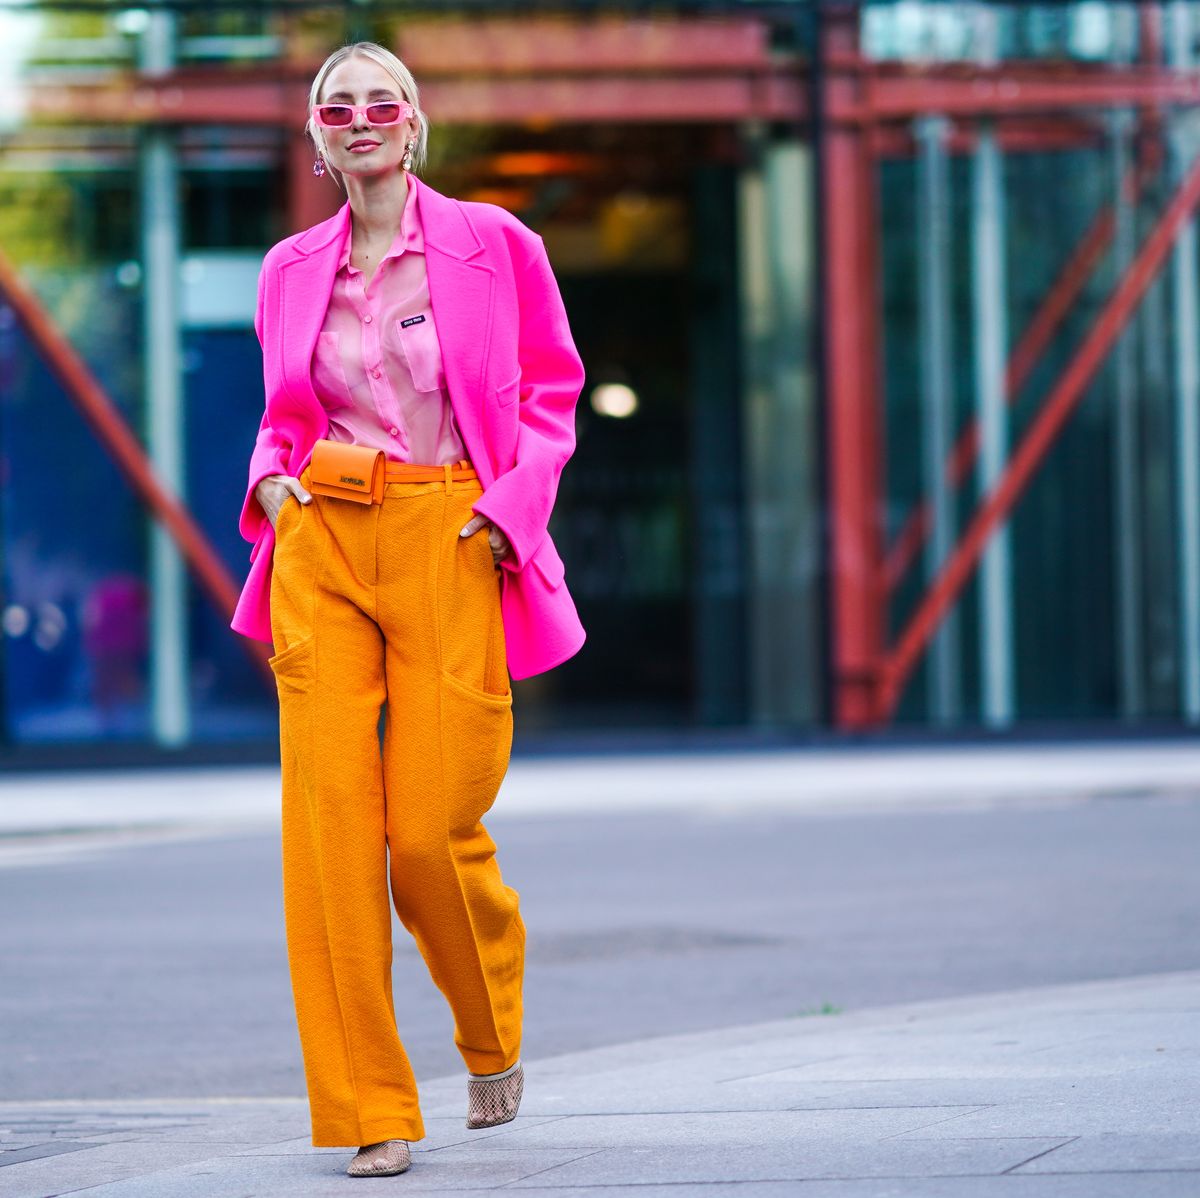 The Science Behind Orange Leggings: How Color Psychology Can Boost